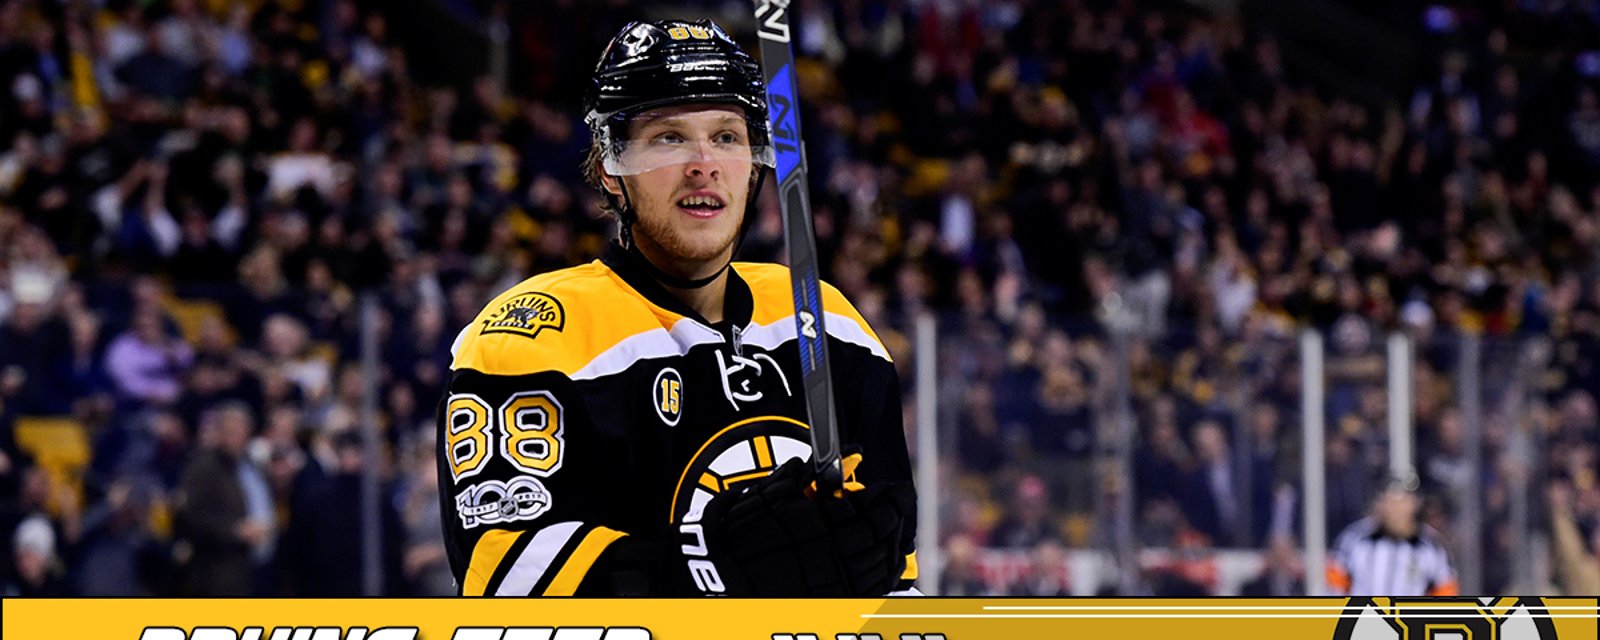 INSIGHT: How much should the Bruins pay Pastrnak?